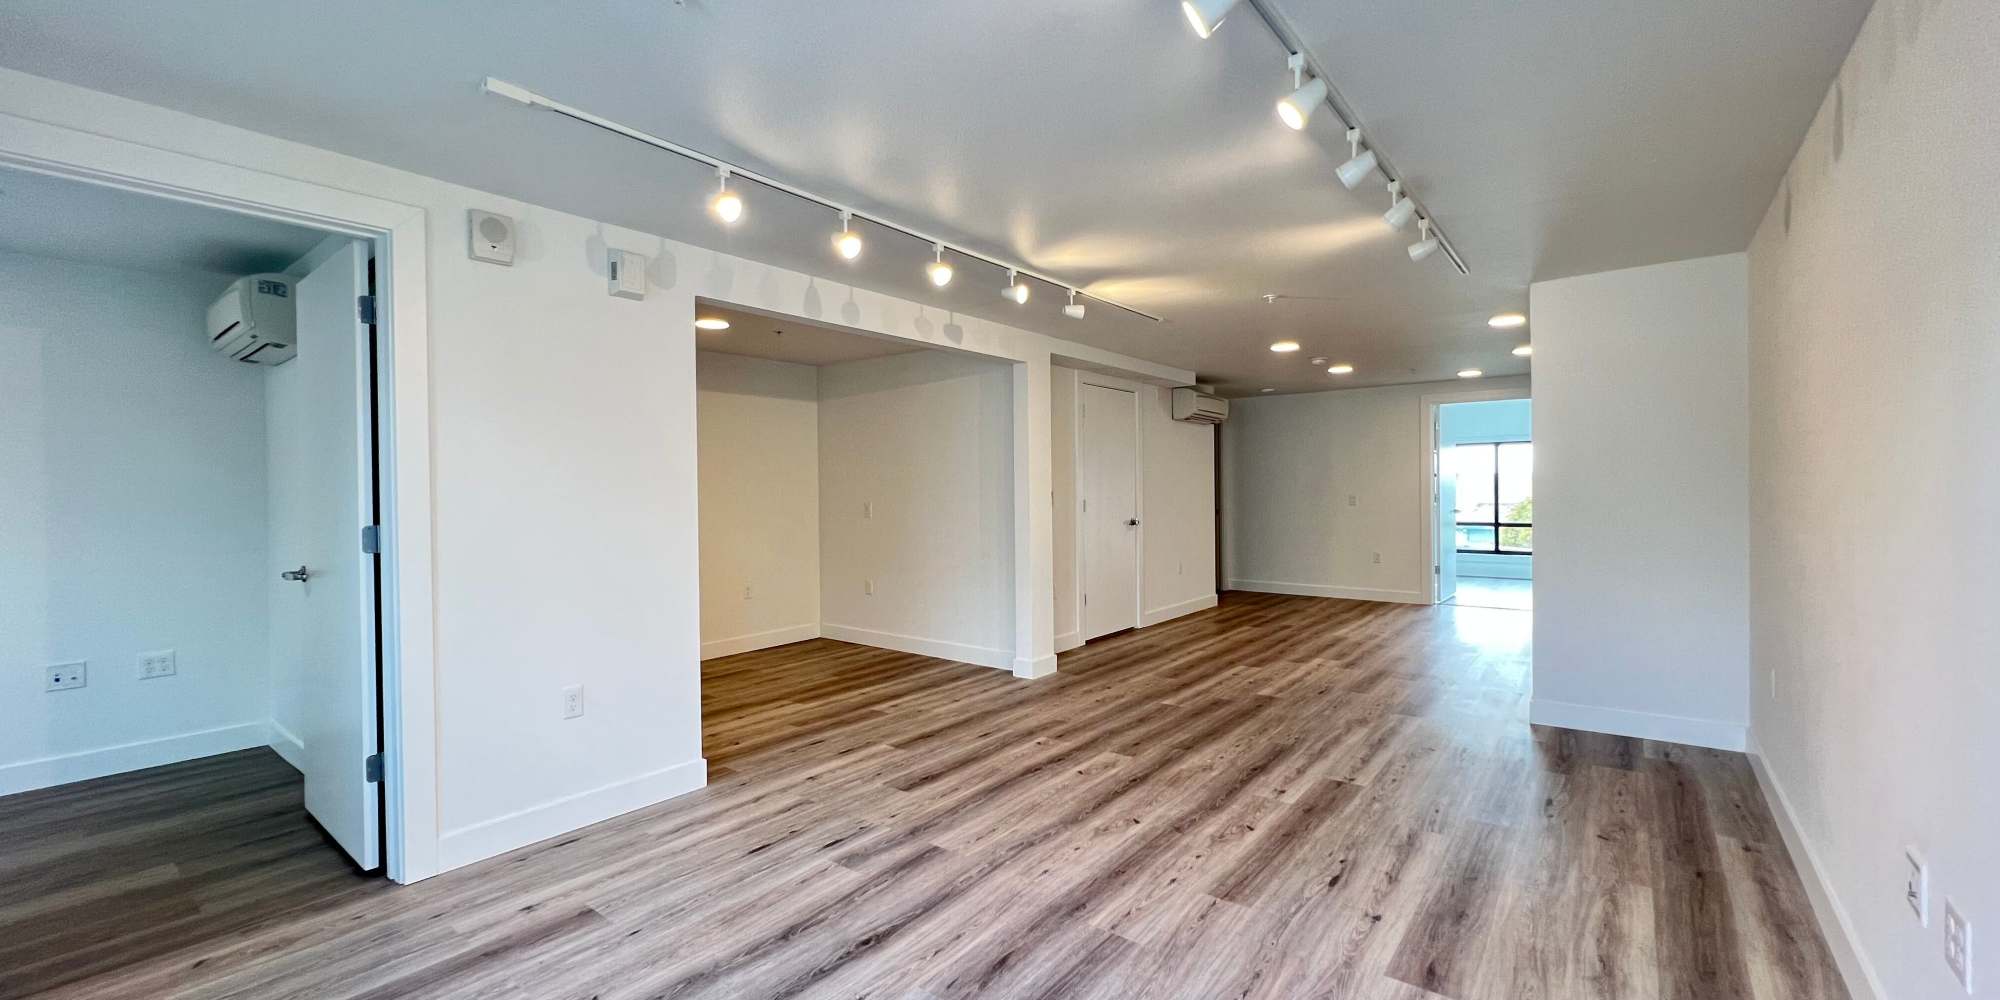 Spacious apartment with wood-style flooring at 1919 Market Street in Oakland, California